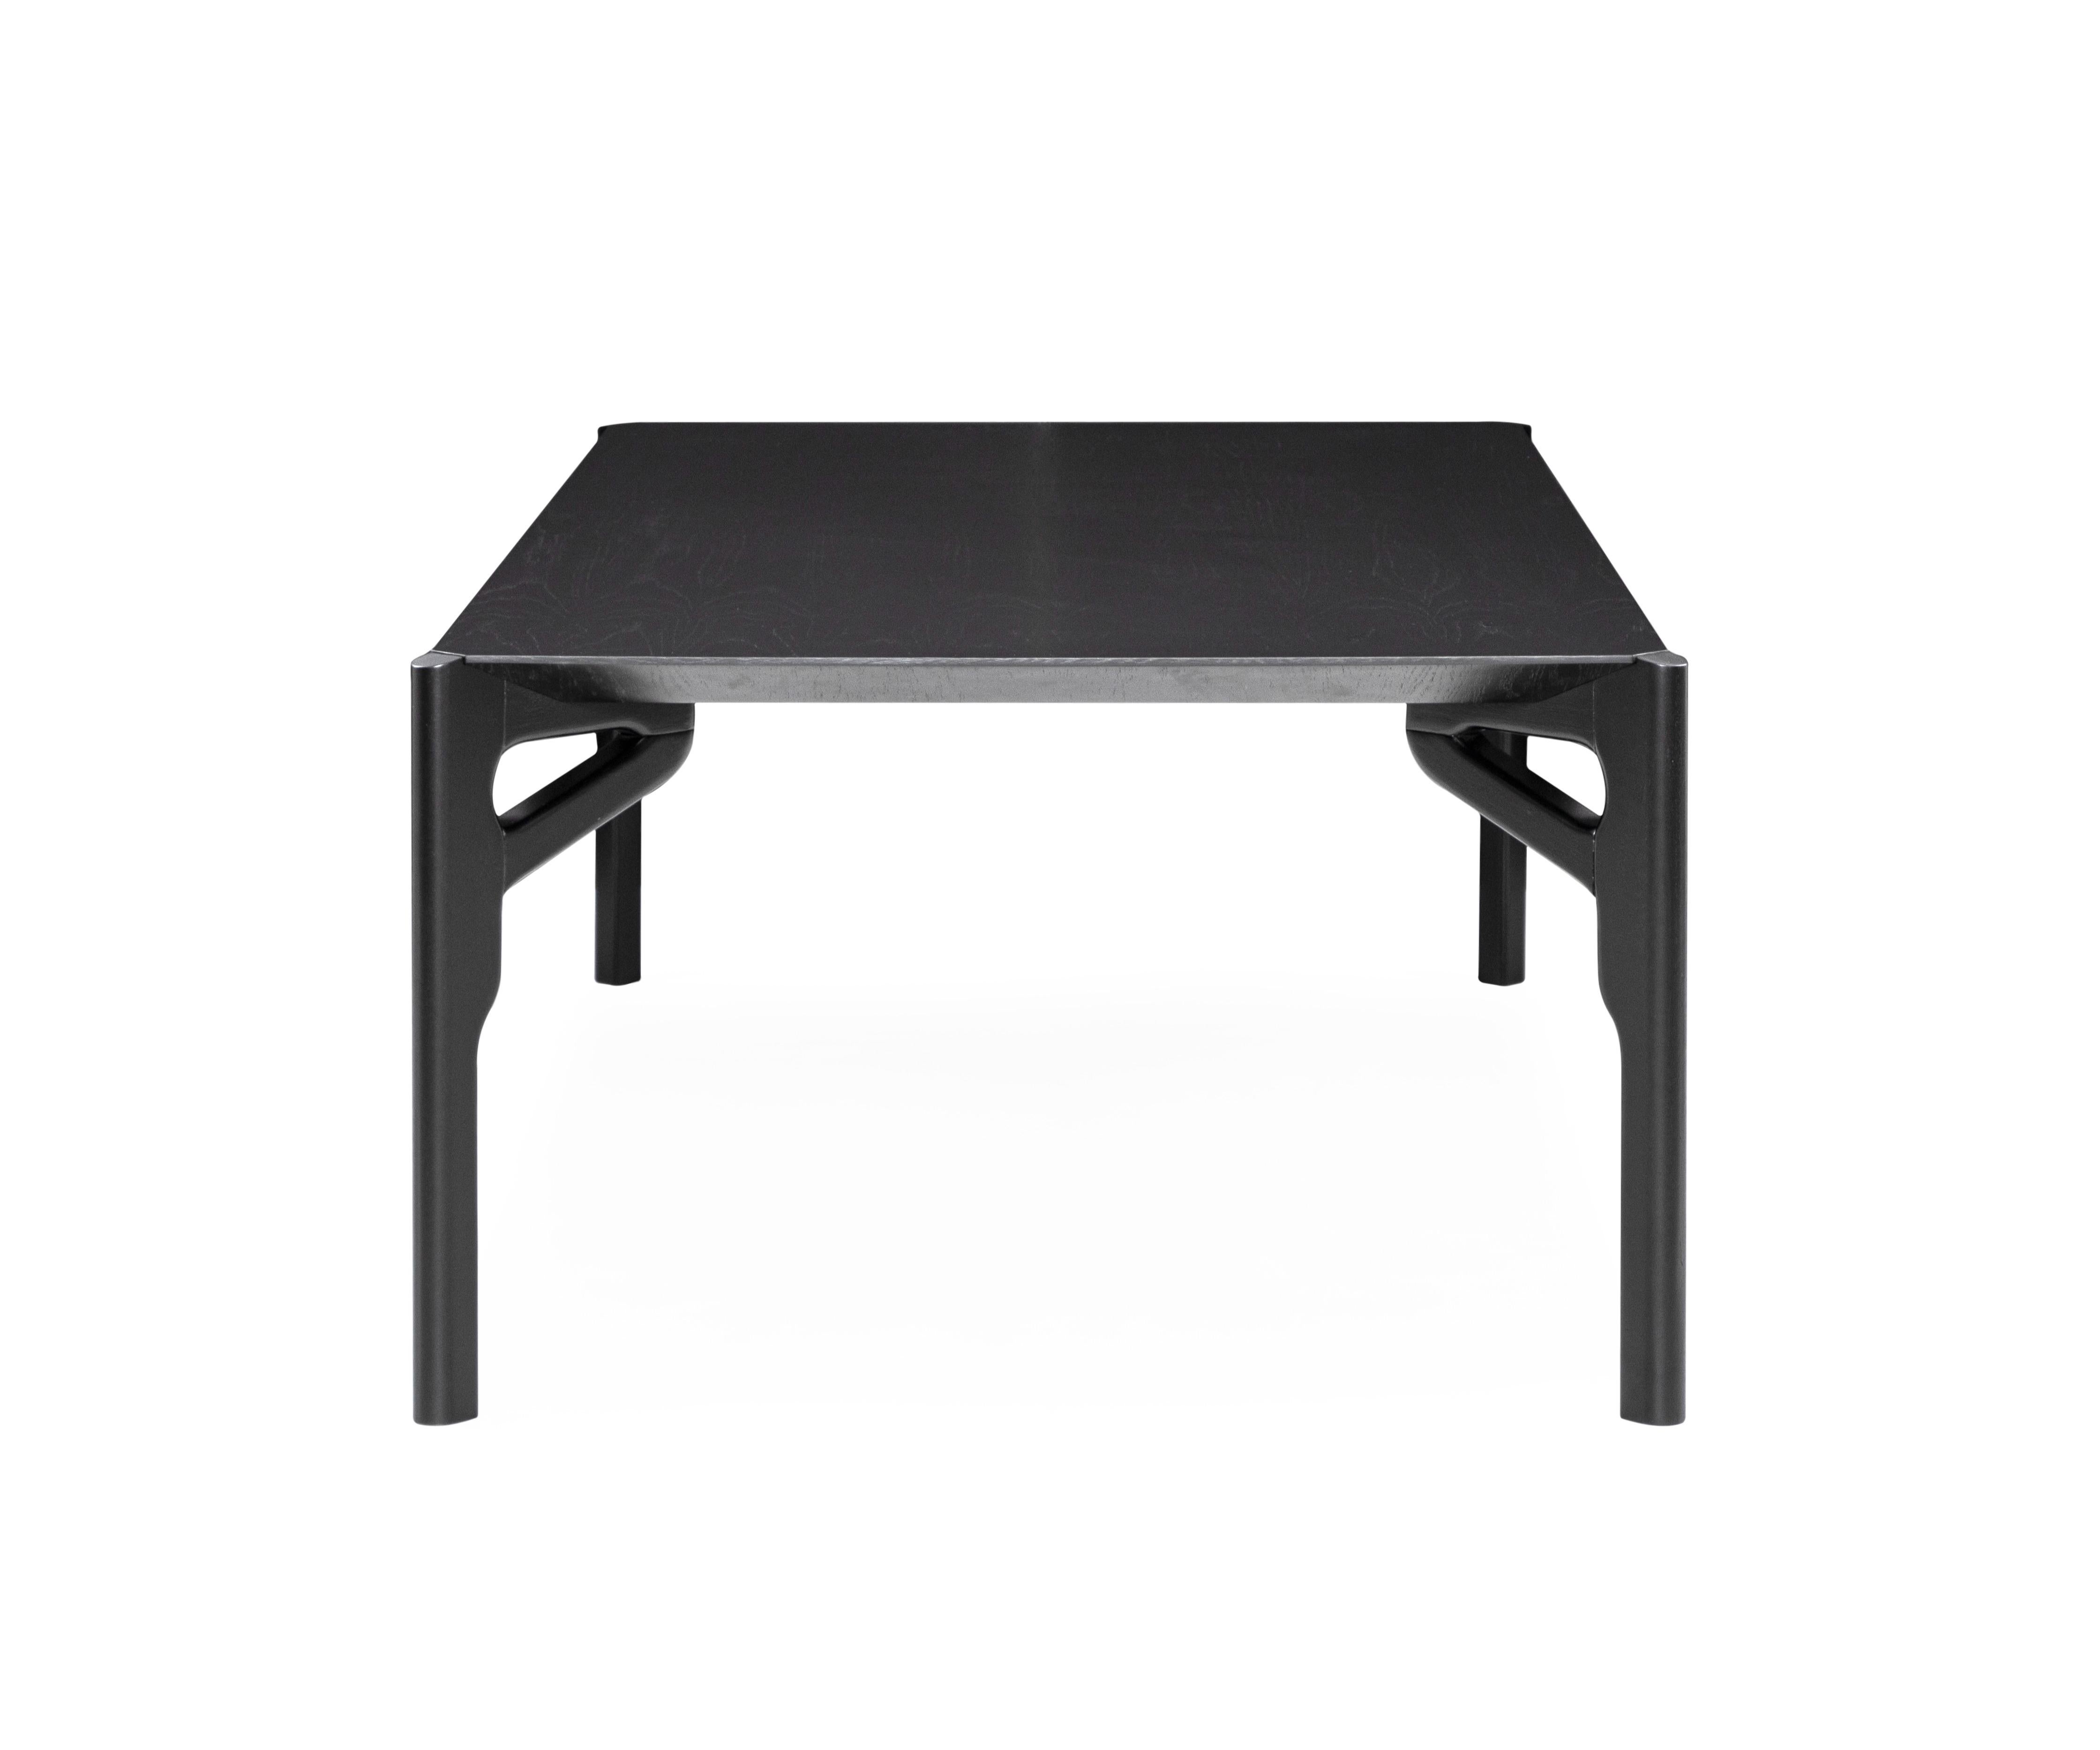 Contemporary Hawk Dining Table with a Black Oak Wood Finish Table Top 86'' For Sale